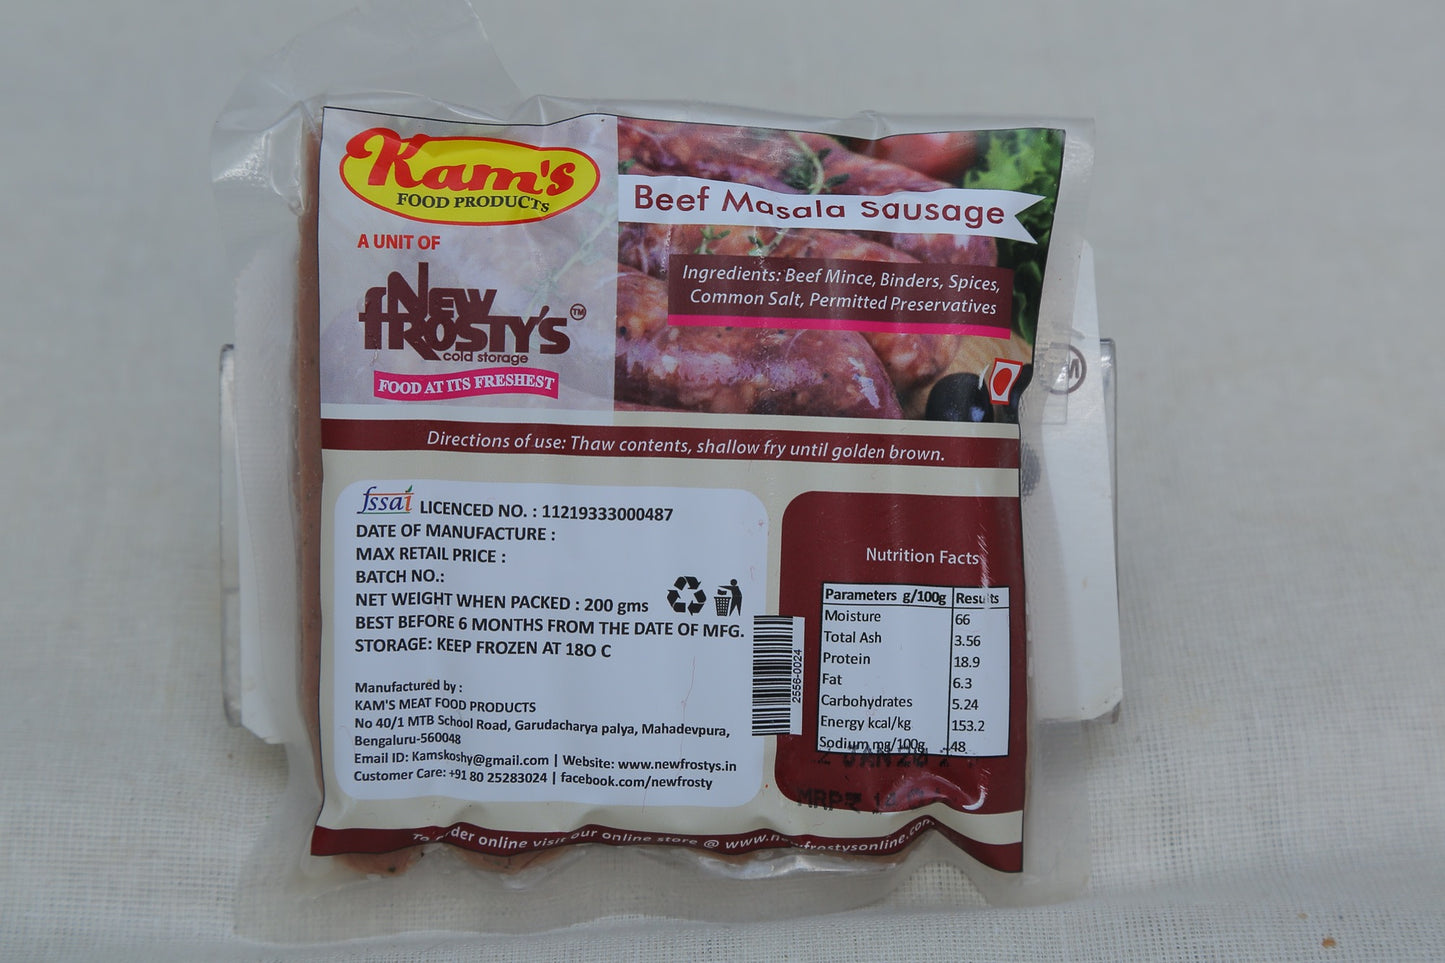 New frostys Beef Masala Sausages